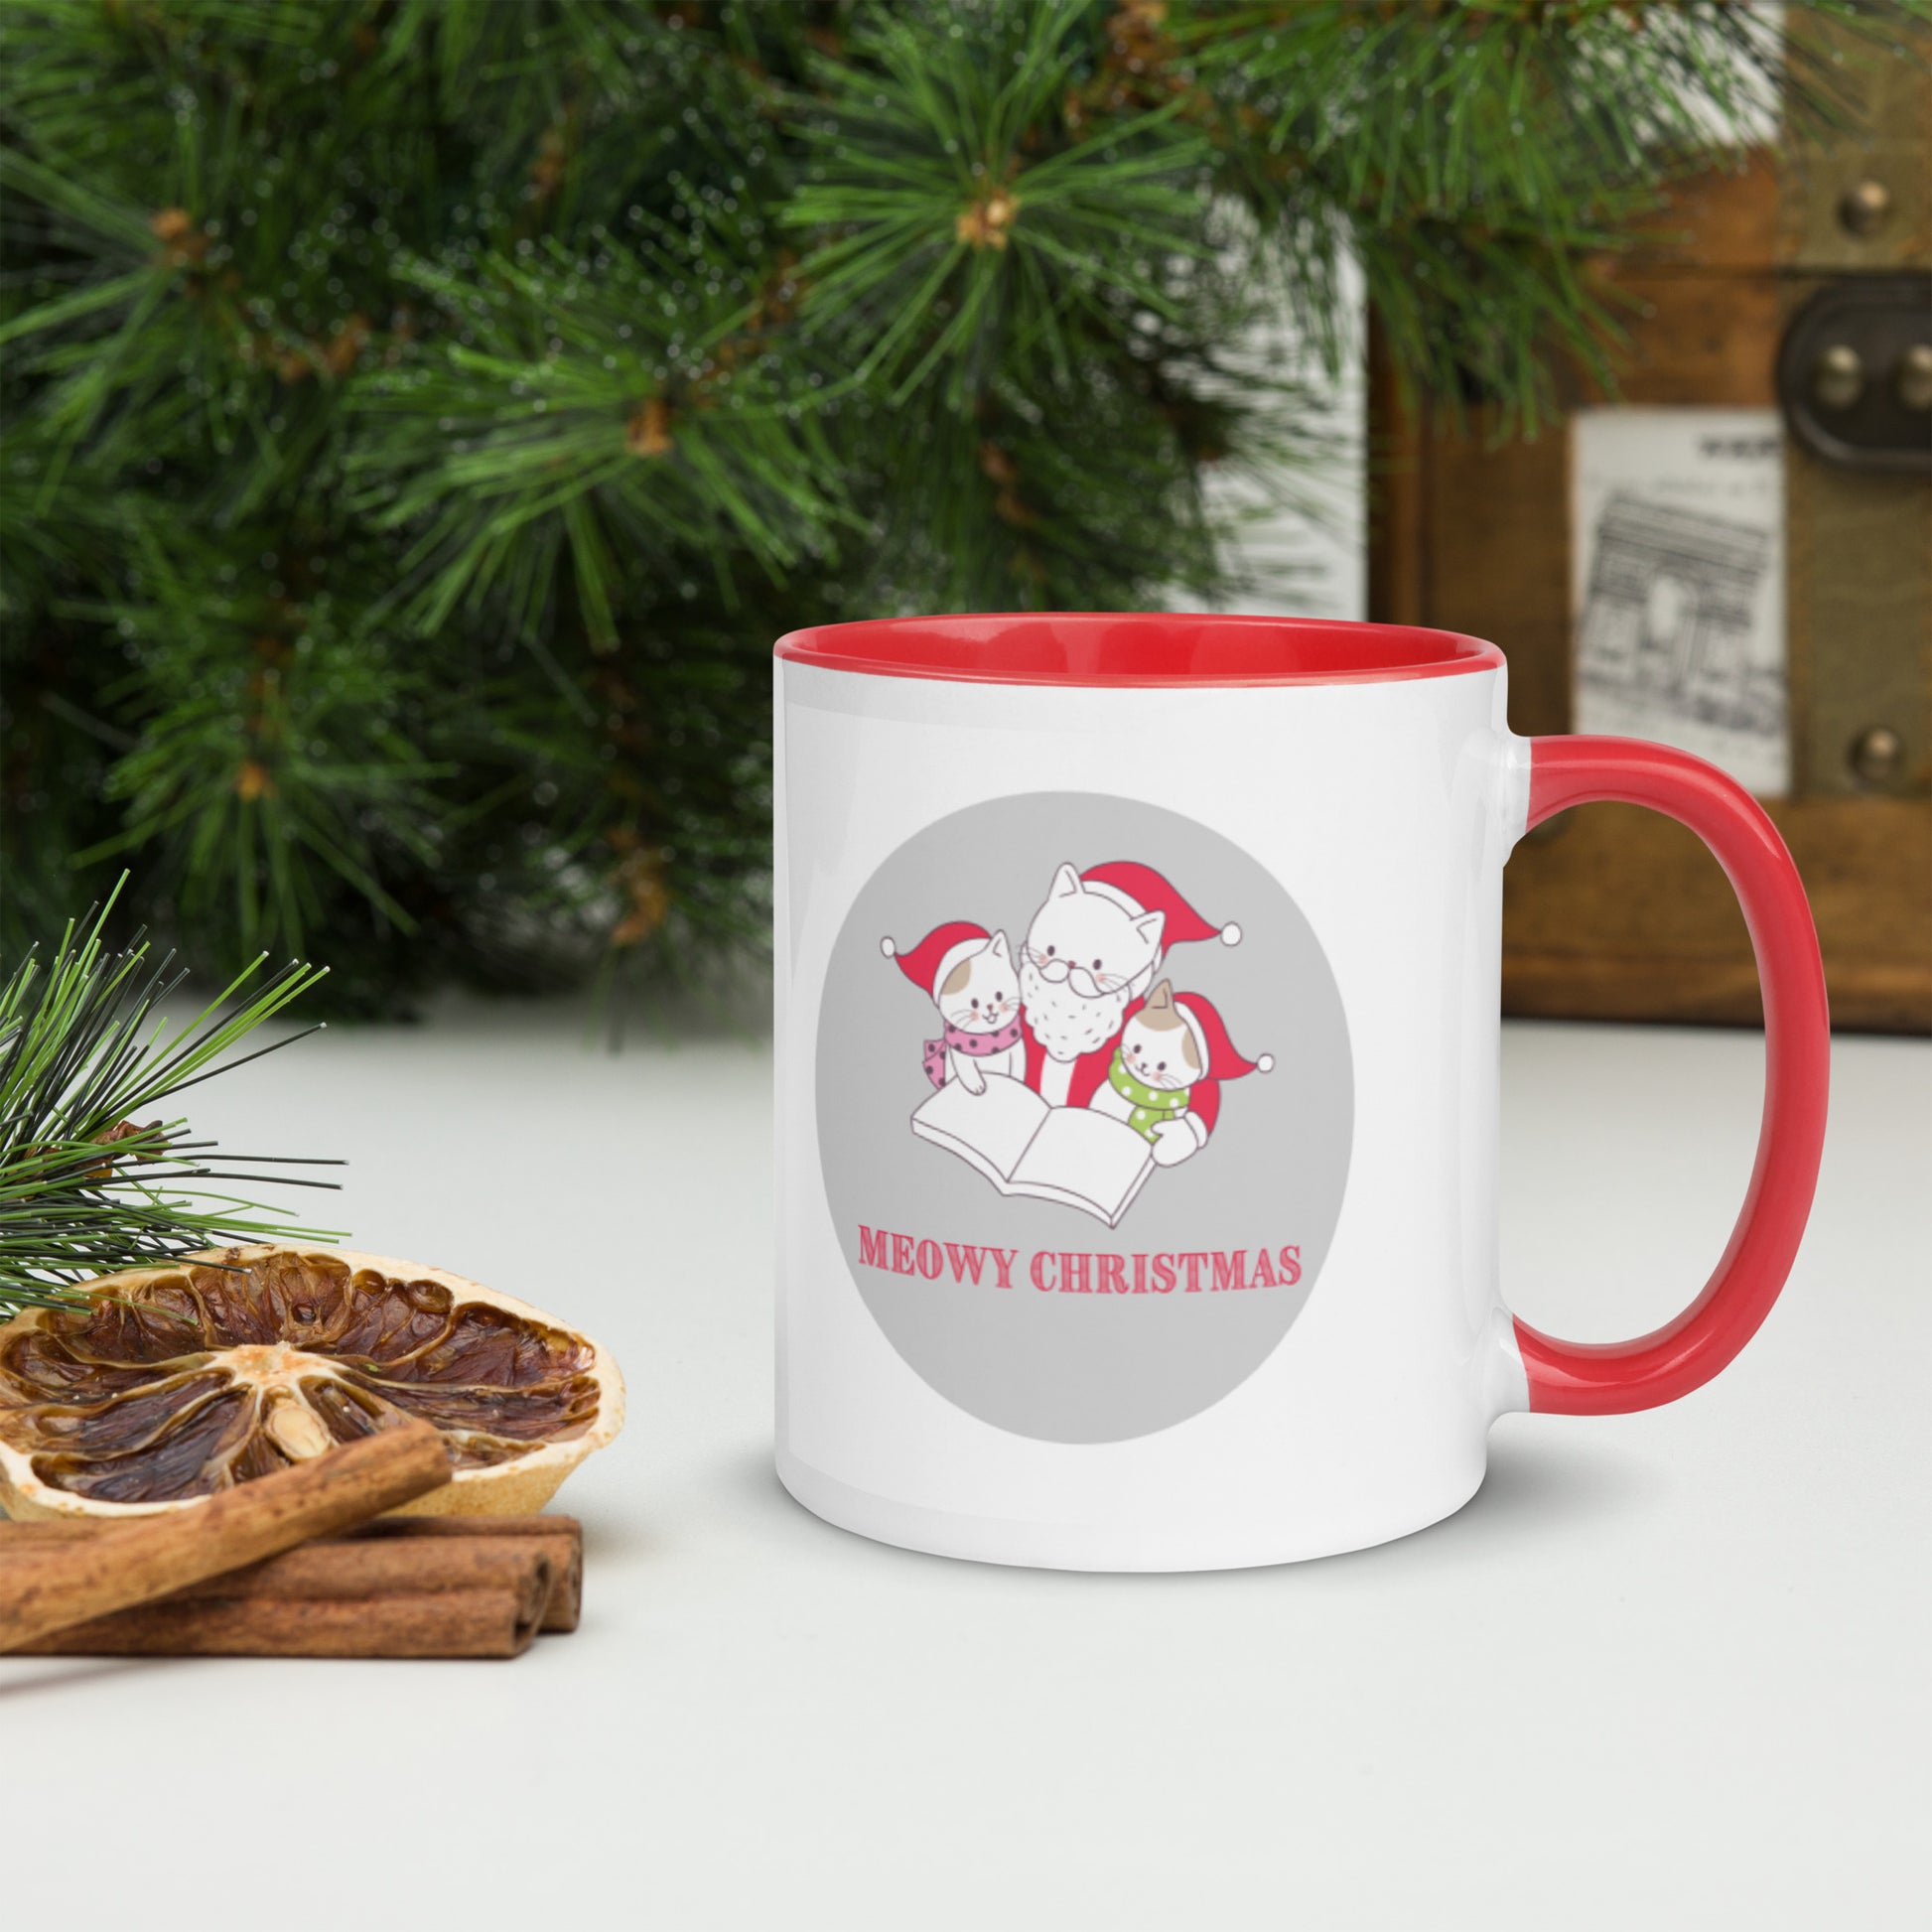 Meowy Christmas Mug with Color Inside-11oz. - The Spinster Librarian Shop